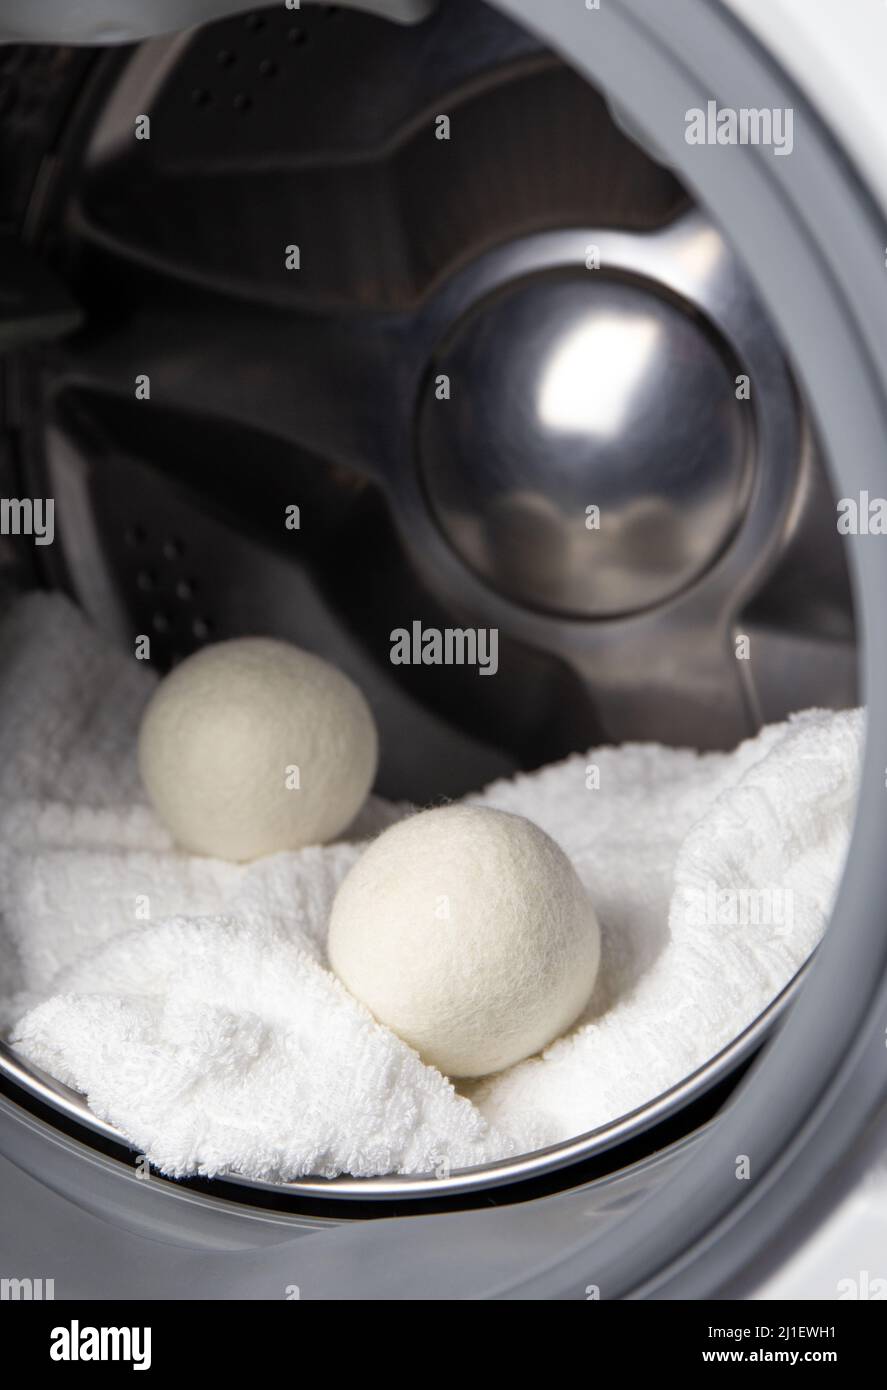 Using wool dryer balls for more soft clothes while tumble drying in washing machine concept. Discharge static electricity and shorten drying time. Stock Photo